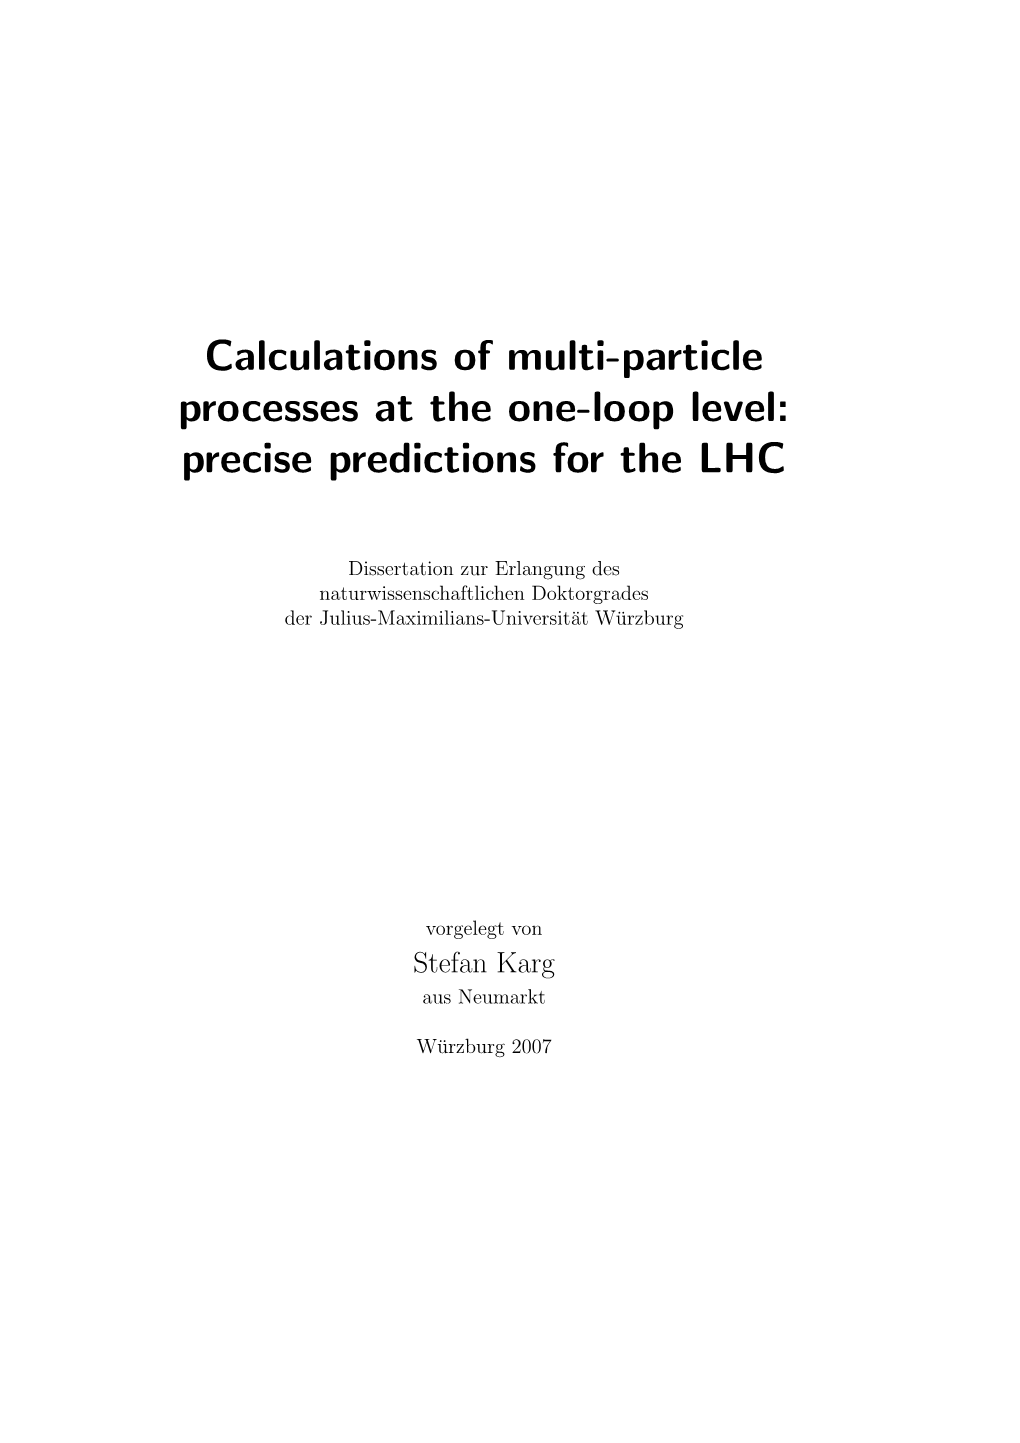 Calculations of Multi-Particle Processes at the One-Loop Level: Precise Predictions for the LHC